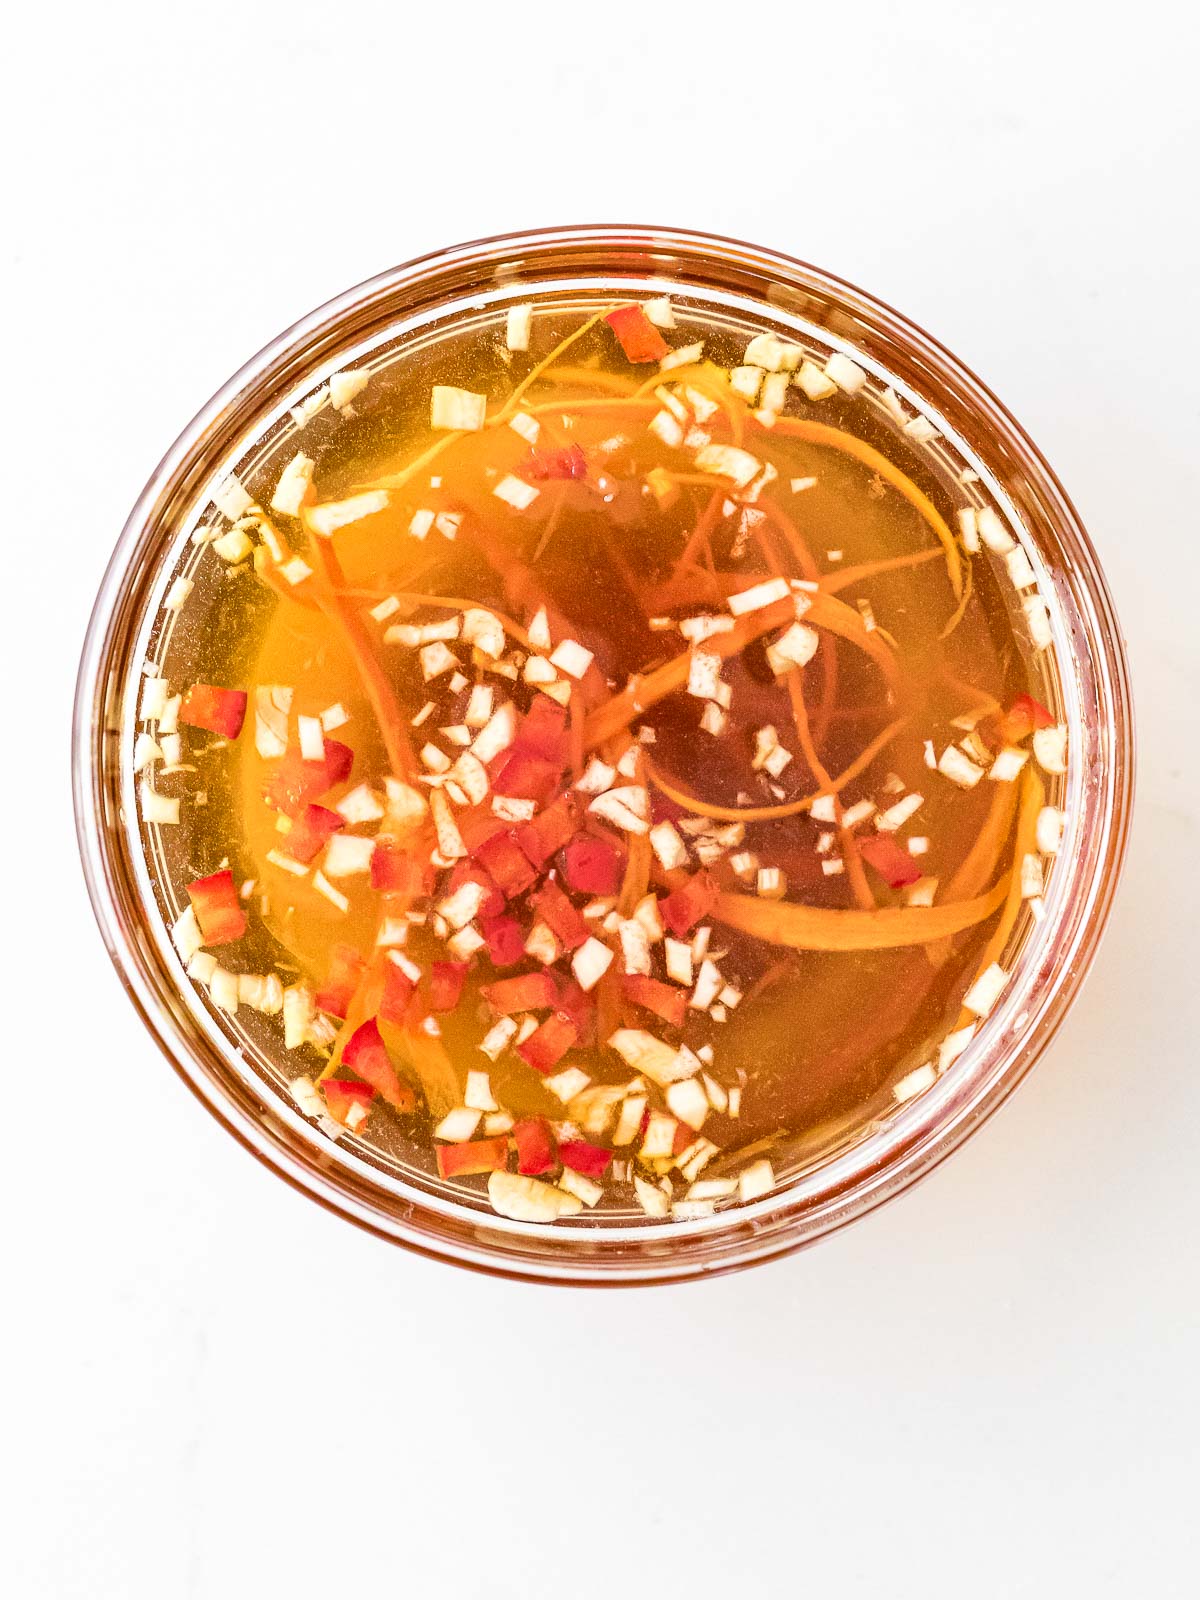 A light golden brown thin sauce in a small galss bowl with chunks of ginger, chili pepper and carrot shreds swimming on the surface